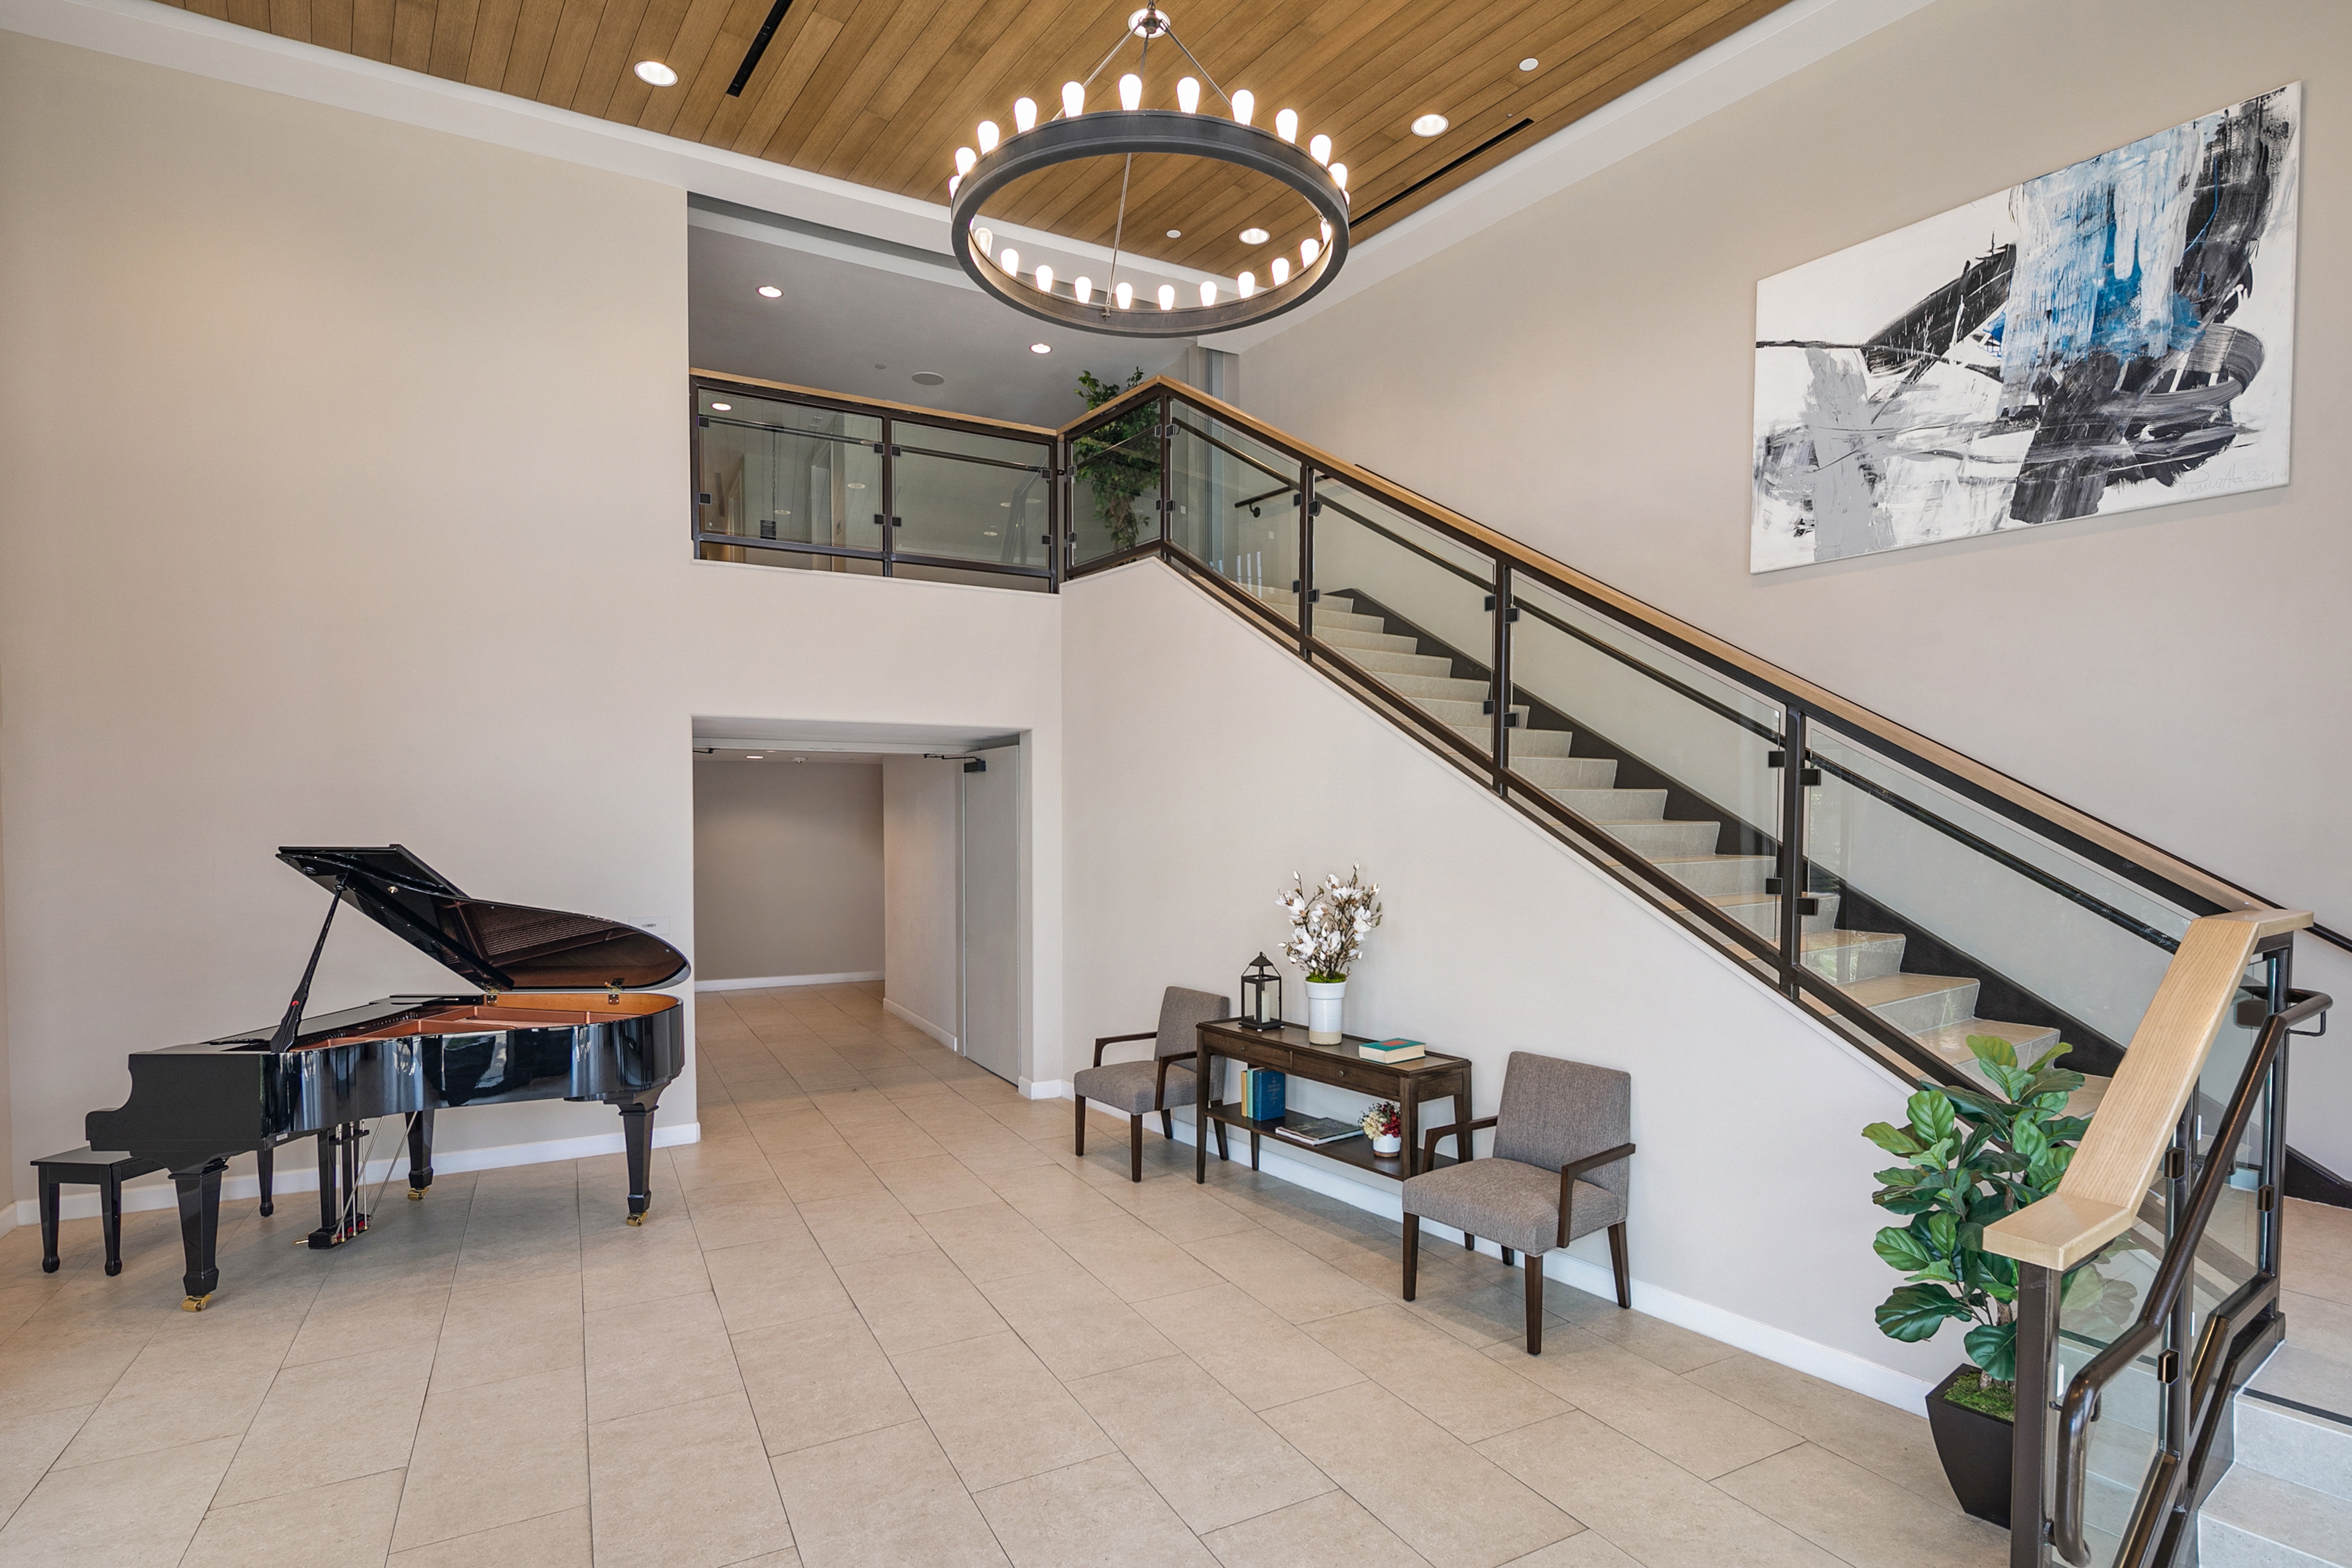 Lobby with grand piano and staircase